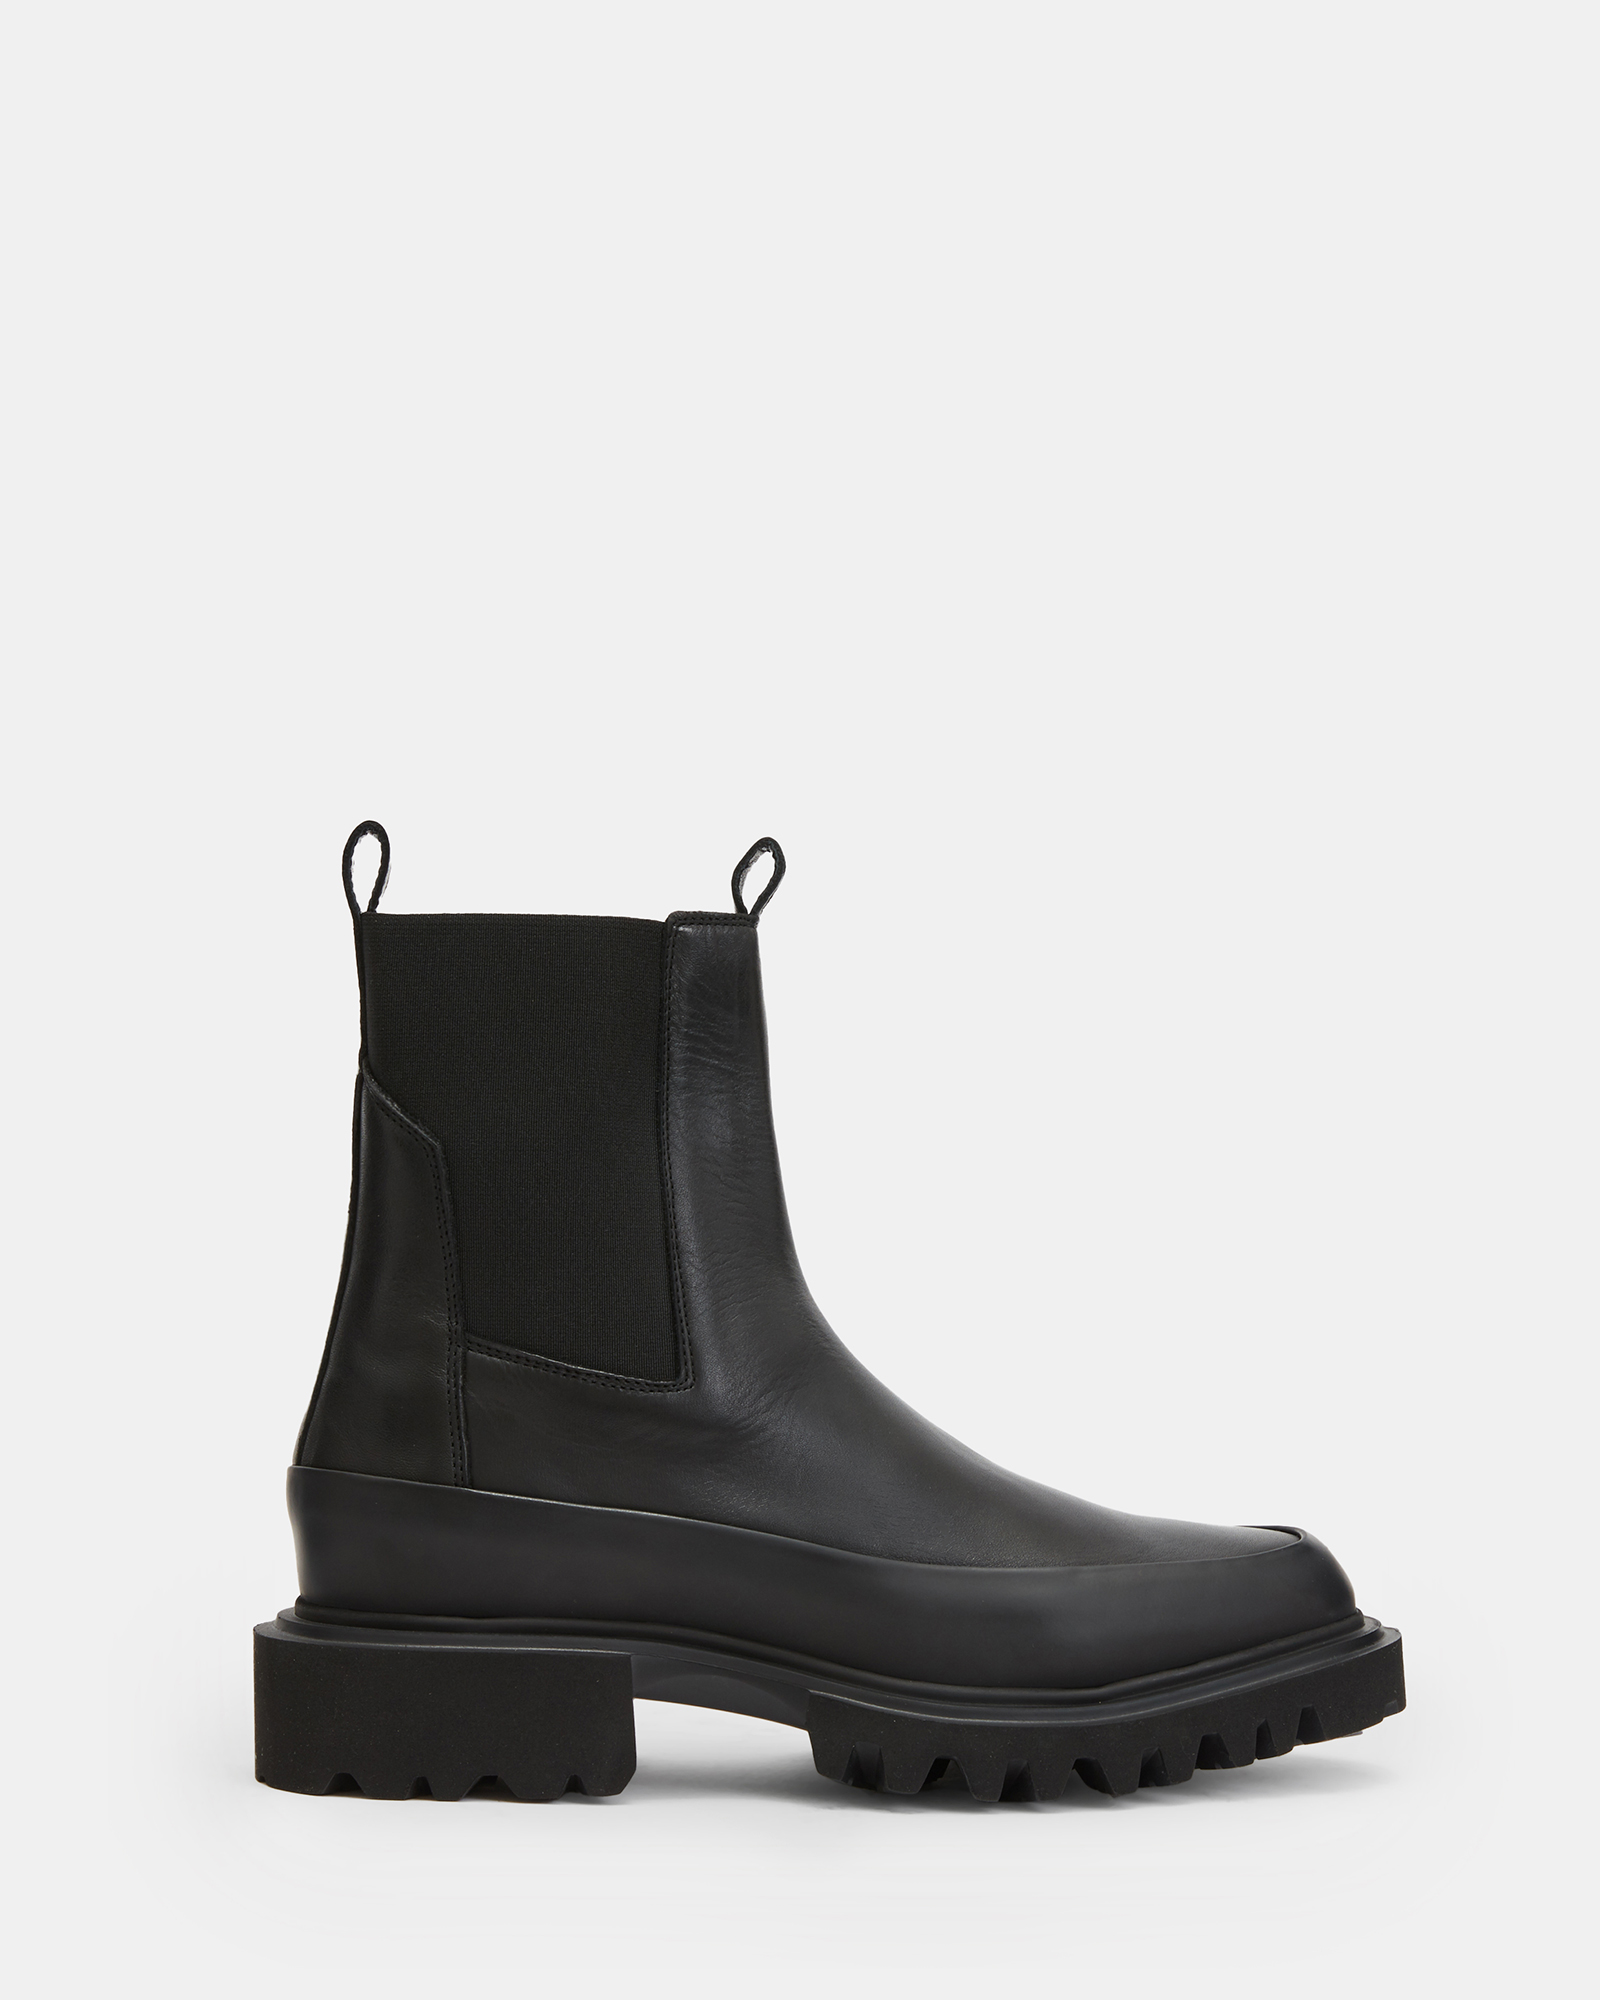 AllSaints Harlee Chunky Sole Leather Boots